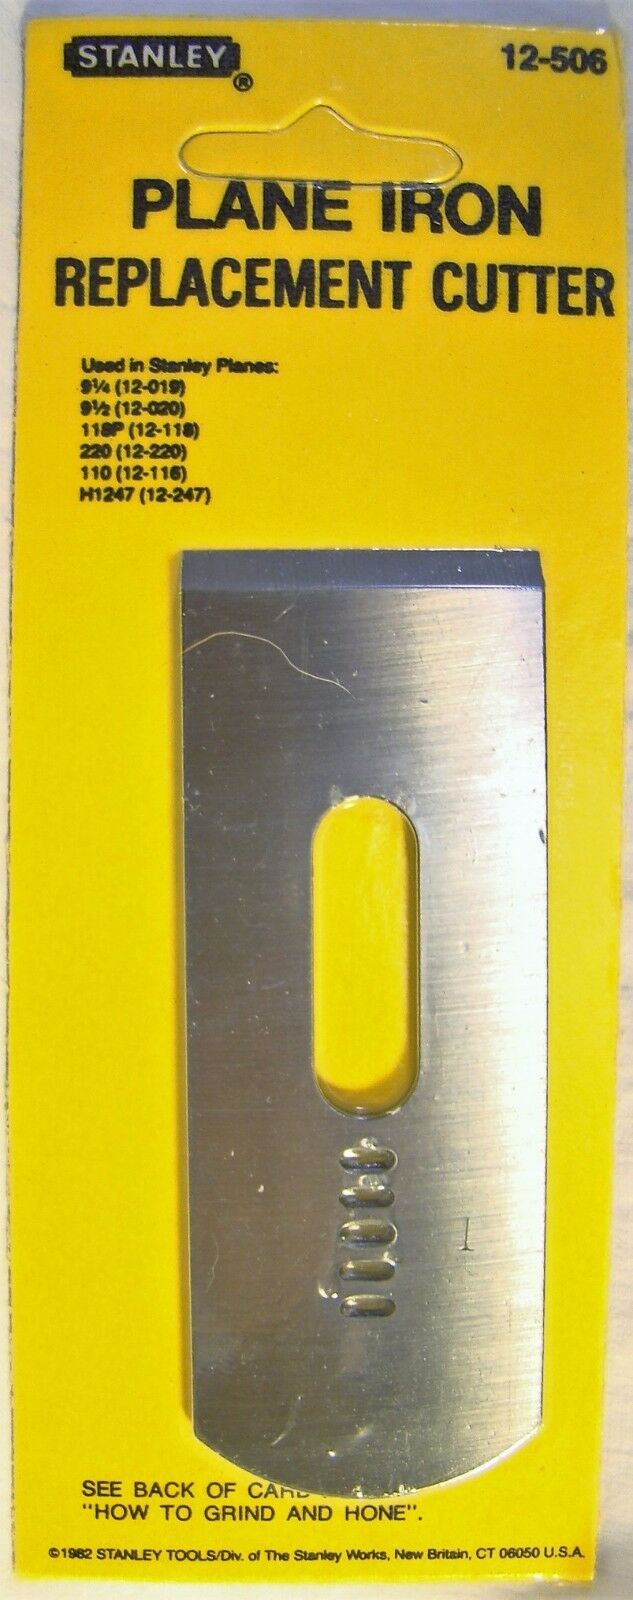 NEW Stanley Plane Iron Replacement Cutter 1 5/8” 12-506 NOS